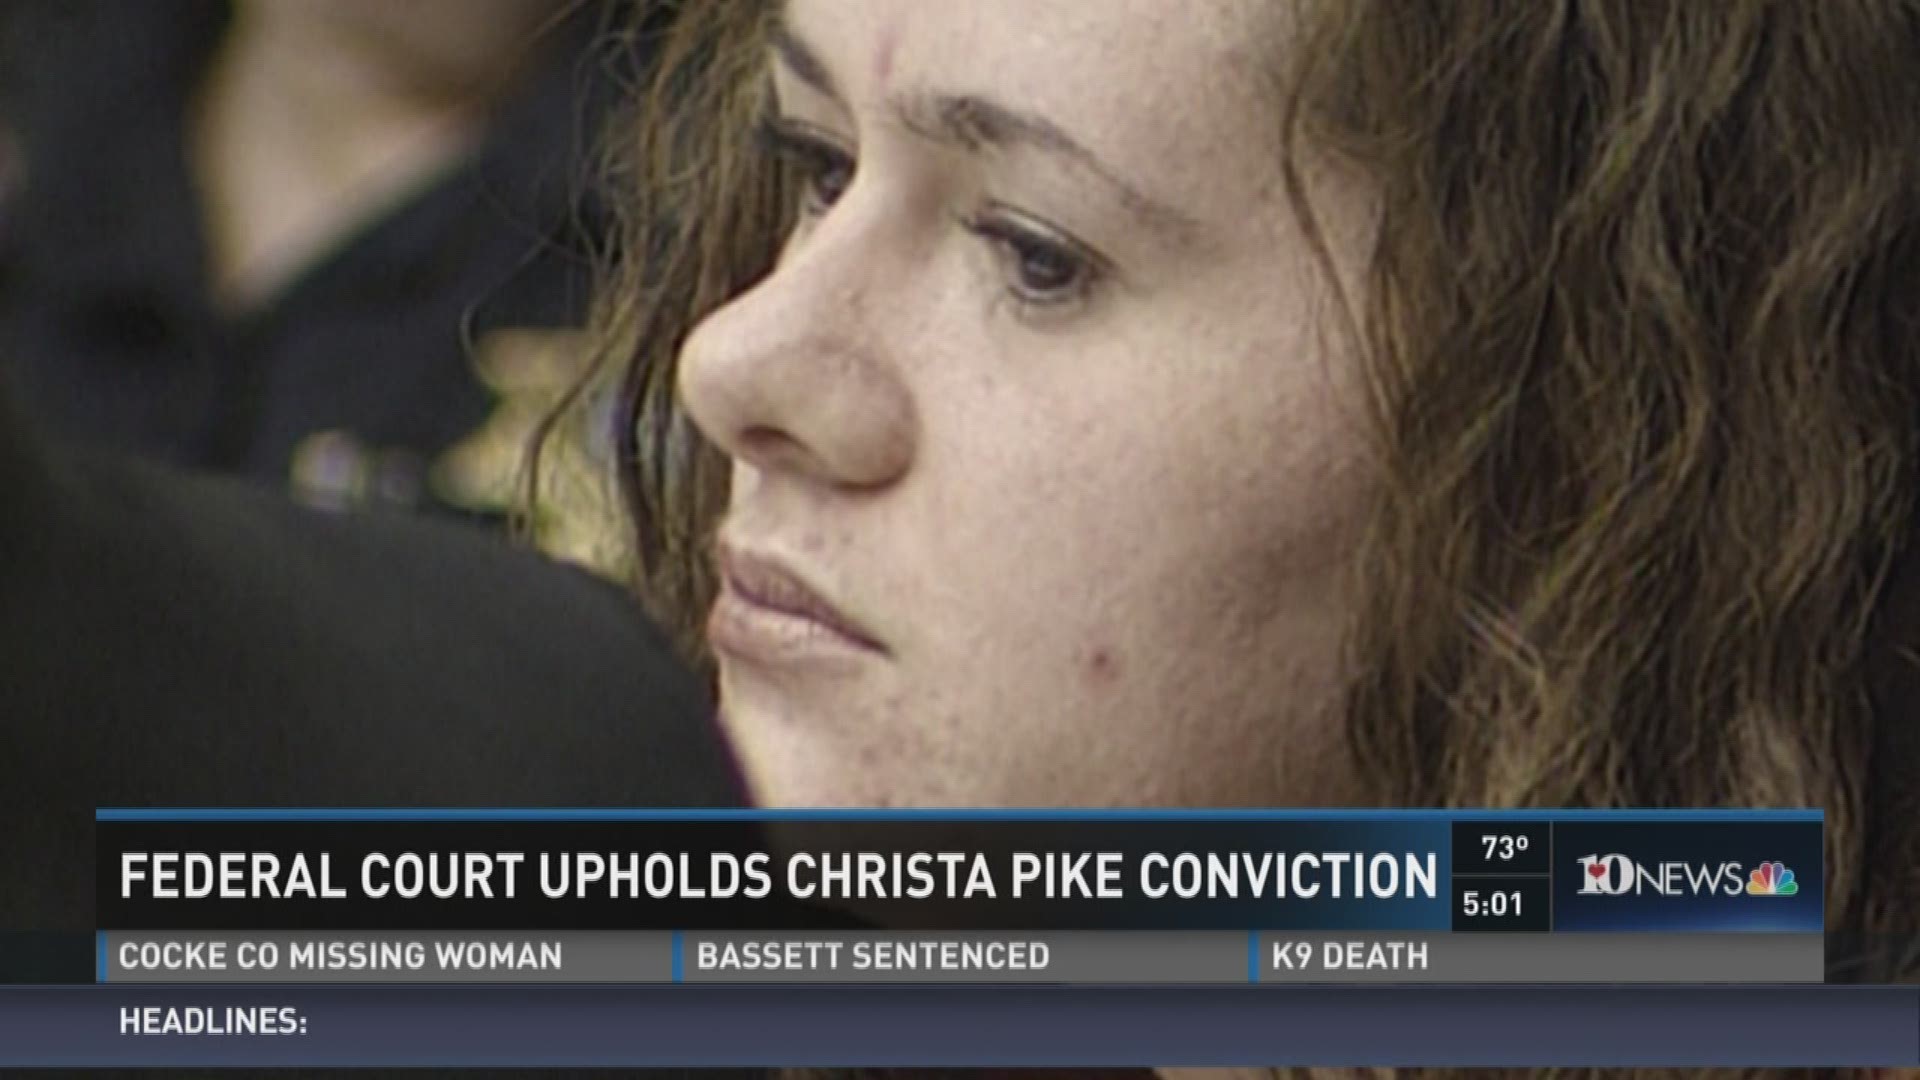 A federal court has denied a request to release and overturn the death penalty conviction for Christa Gail Pike, a former Knoxville resident who was sentenced two decades ago for the brutal torture and murder of a fellow co-worker that included carving a